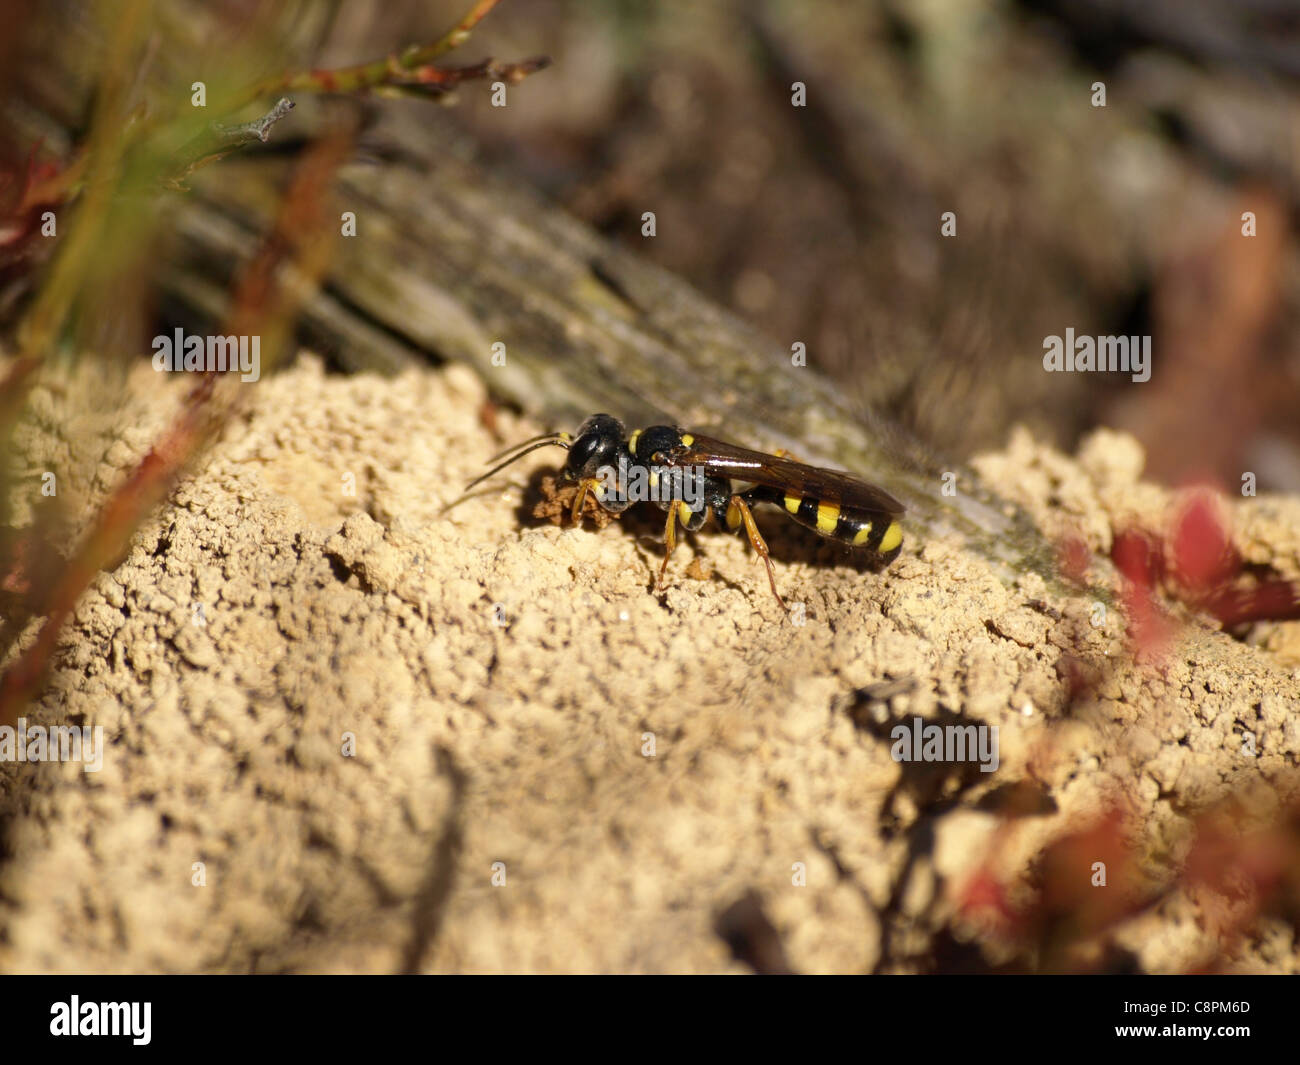 Solitary Wasp / Ectemnius cephalotes / insect / Grabwespe with a clod of earth Stock Photo